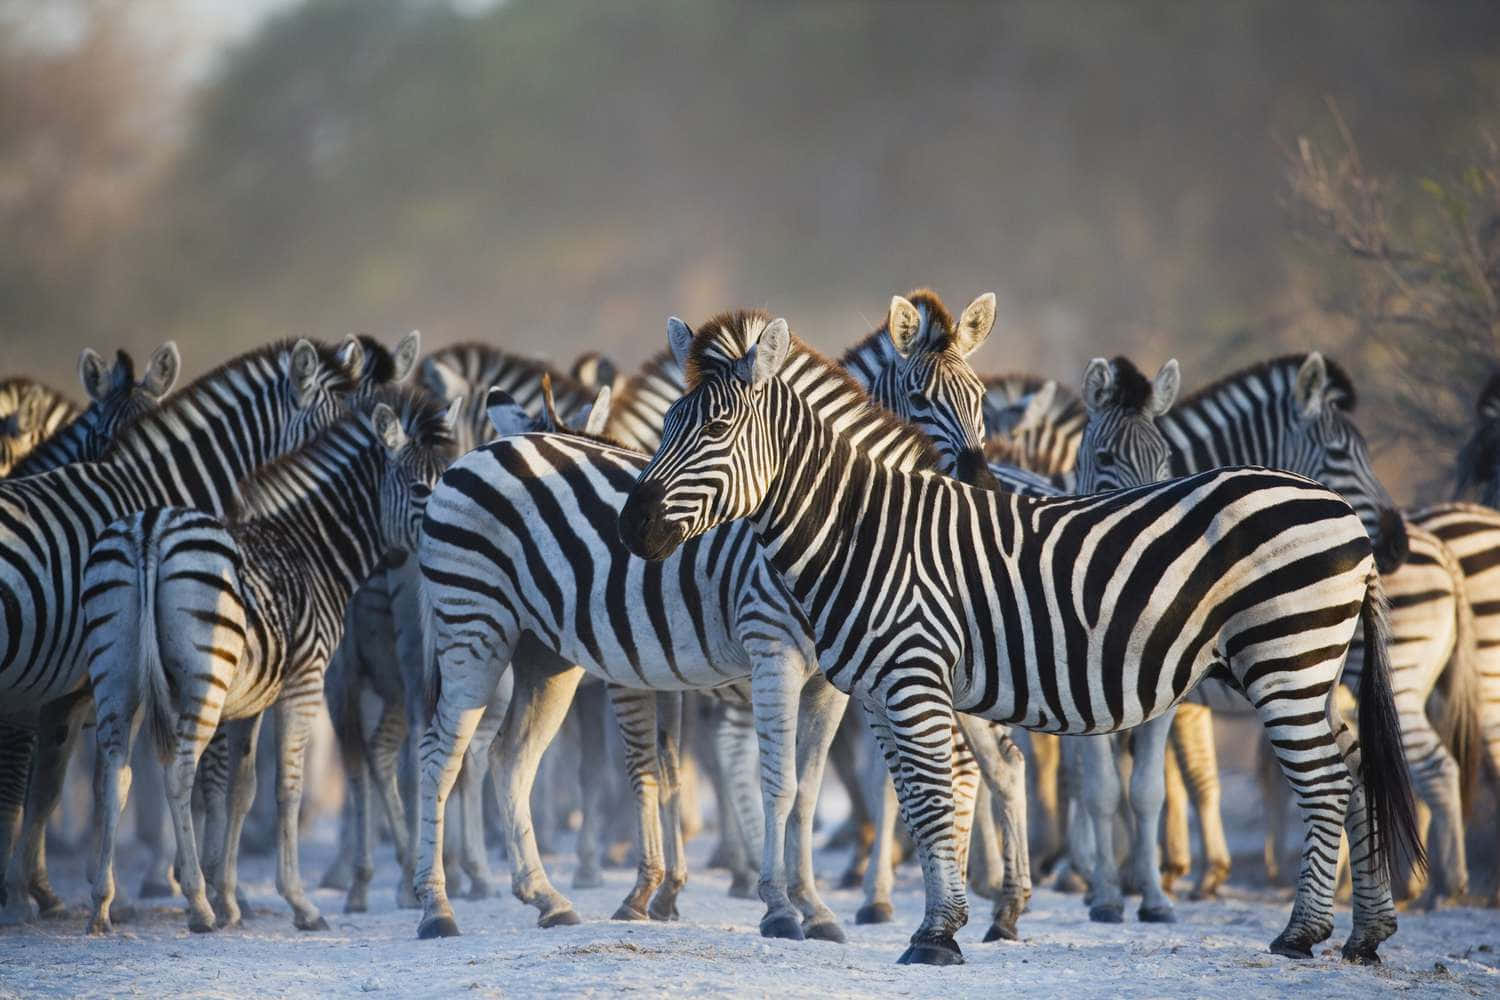 Get to Know Some of Africa's Incredible Wildlife!